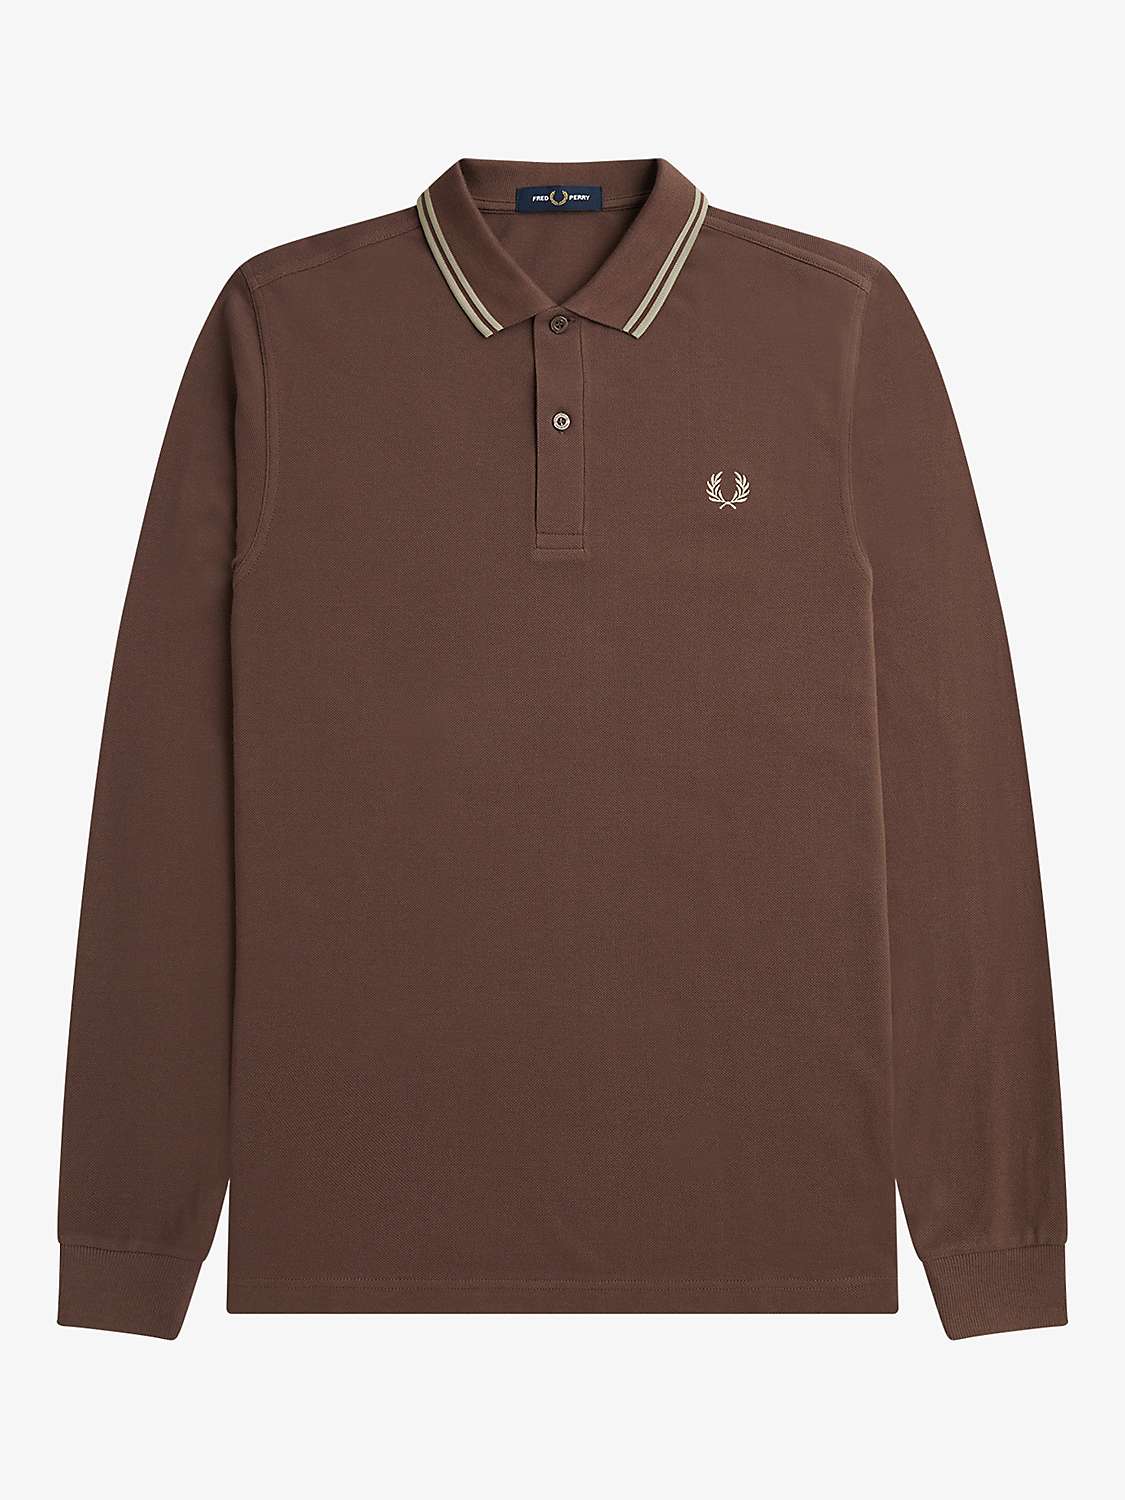 Buy Fred Perry Twin Tipped Tennis Long Sleeve Polo Shirt, Brick/Warm Grey Online at johnlewis.com